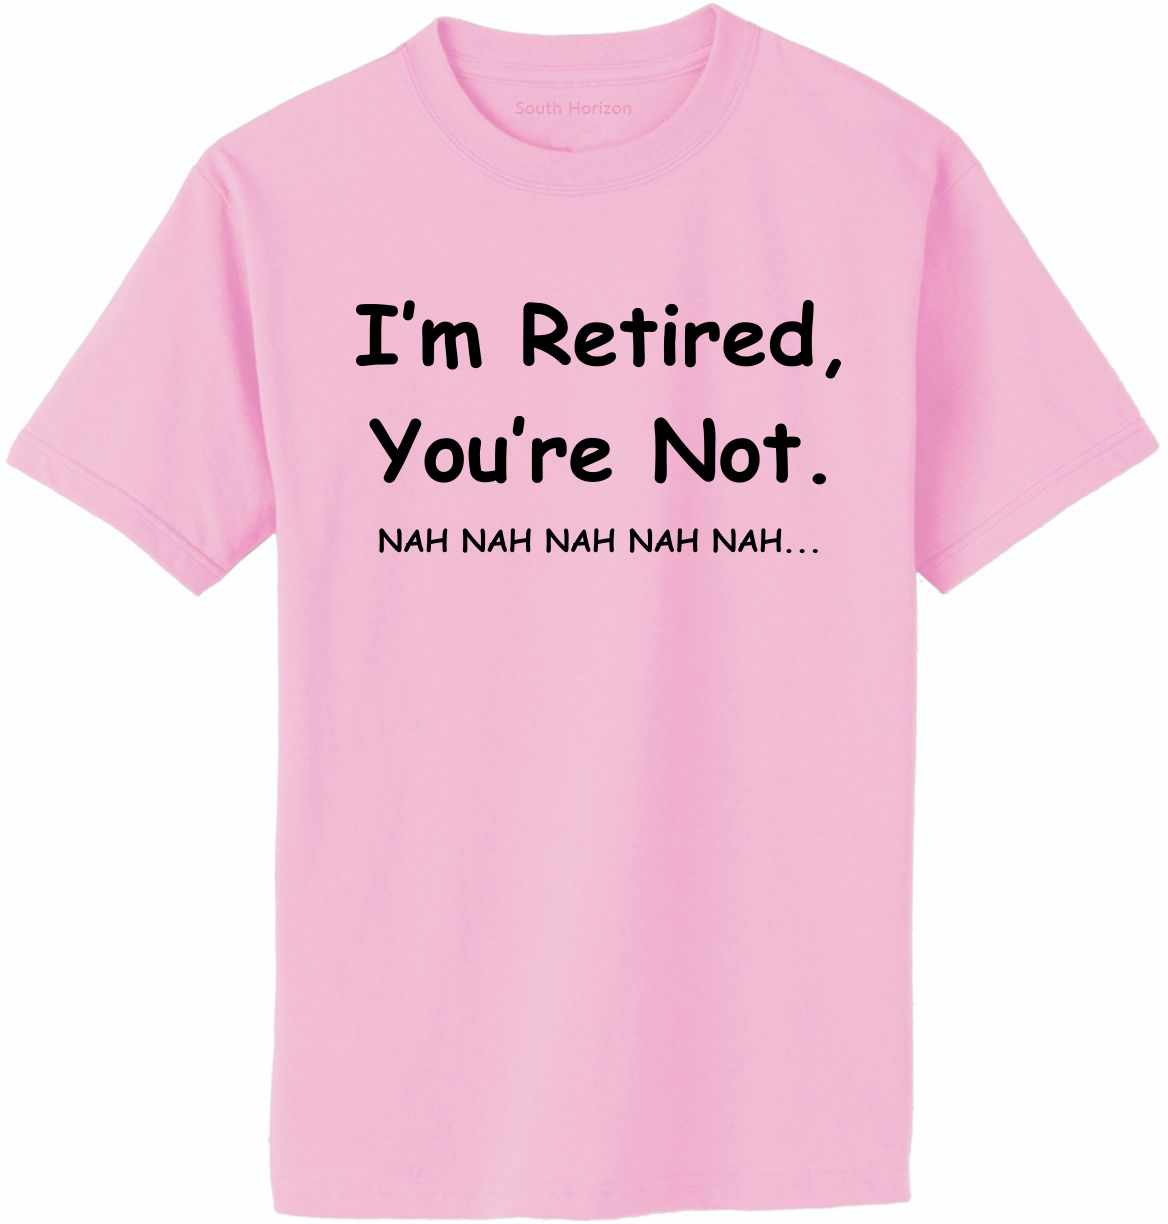 I'm Retired You Are Not. nah nah nah Adult T-Shirt